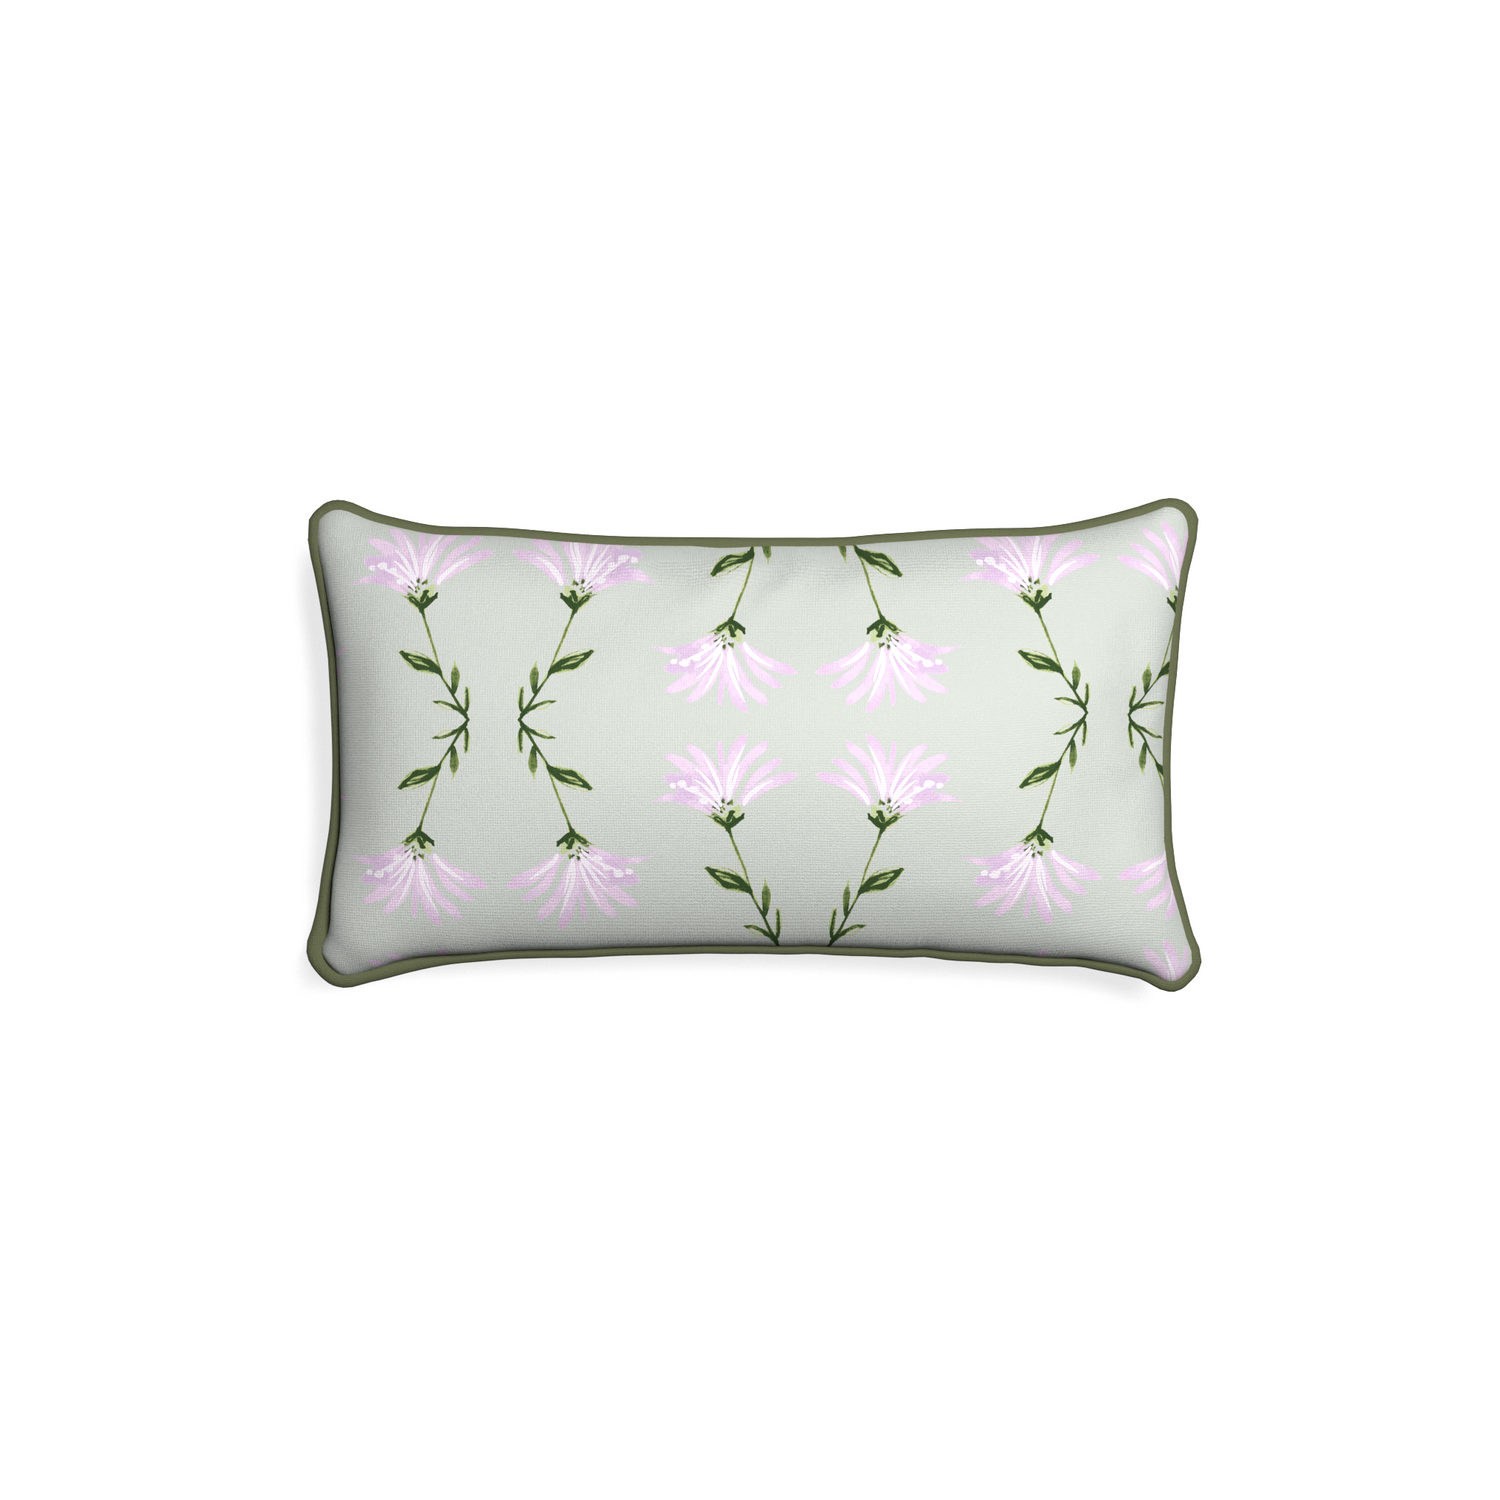 Lumbar marina sage custom pillow with f piping on white background